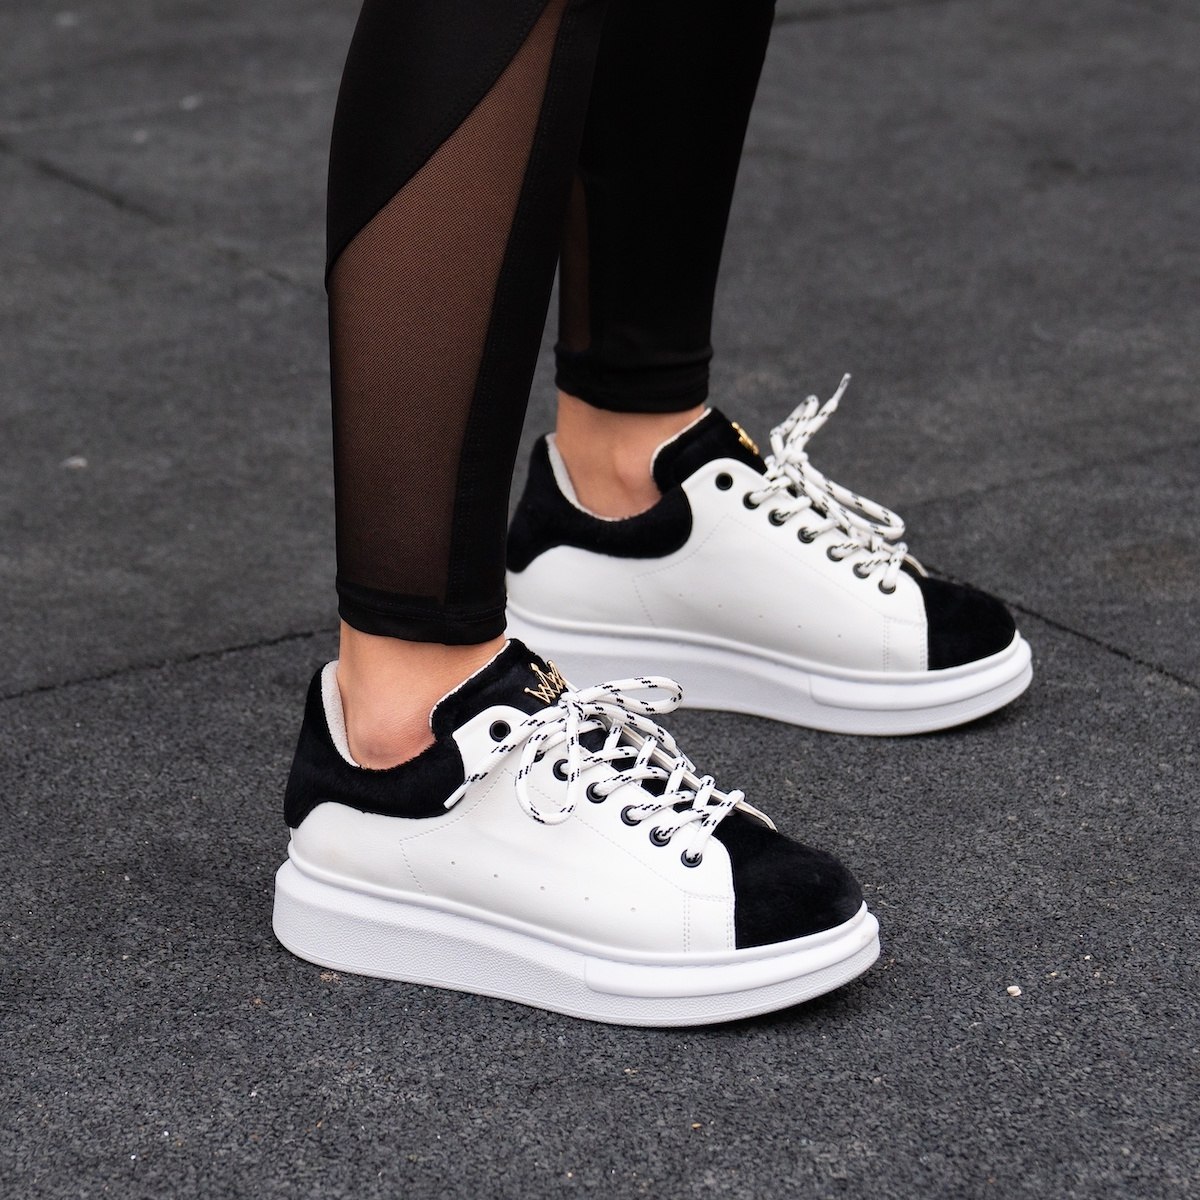 Woman Hype Sole Sneakers in White-Partial Short Black Fur